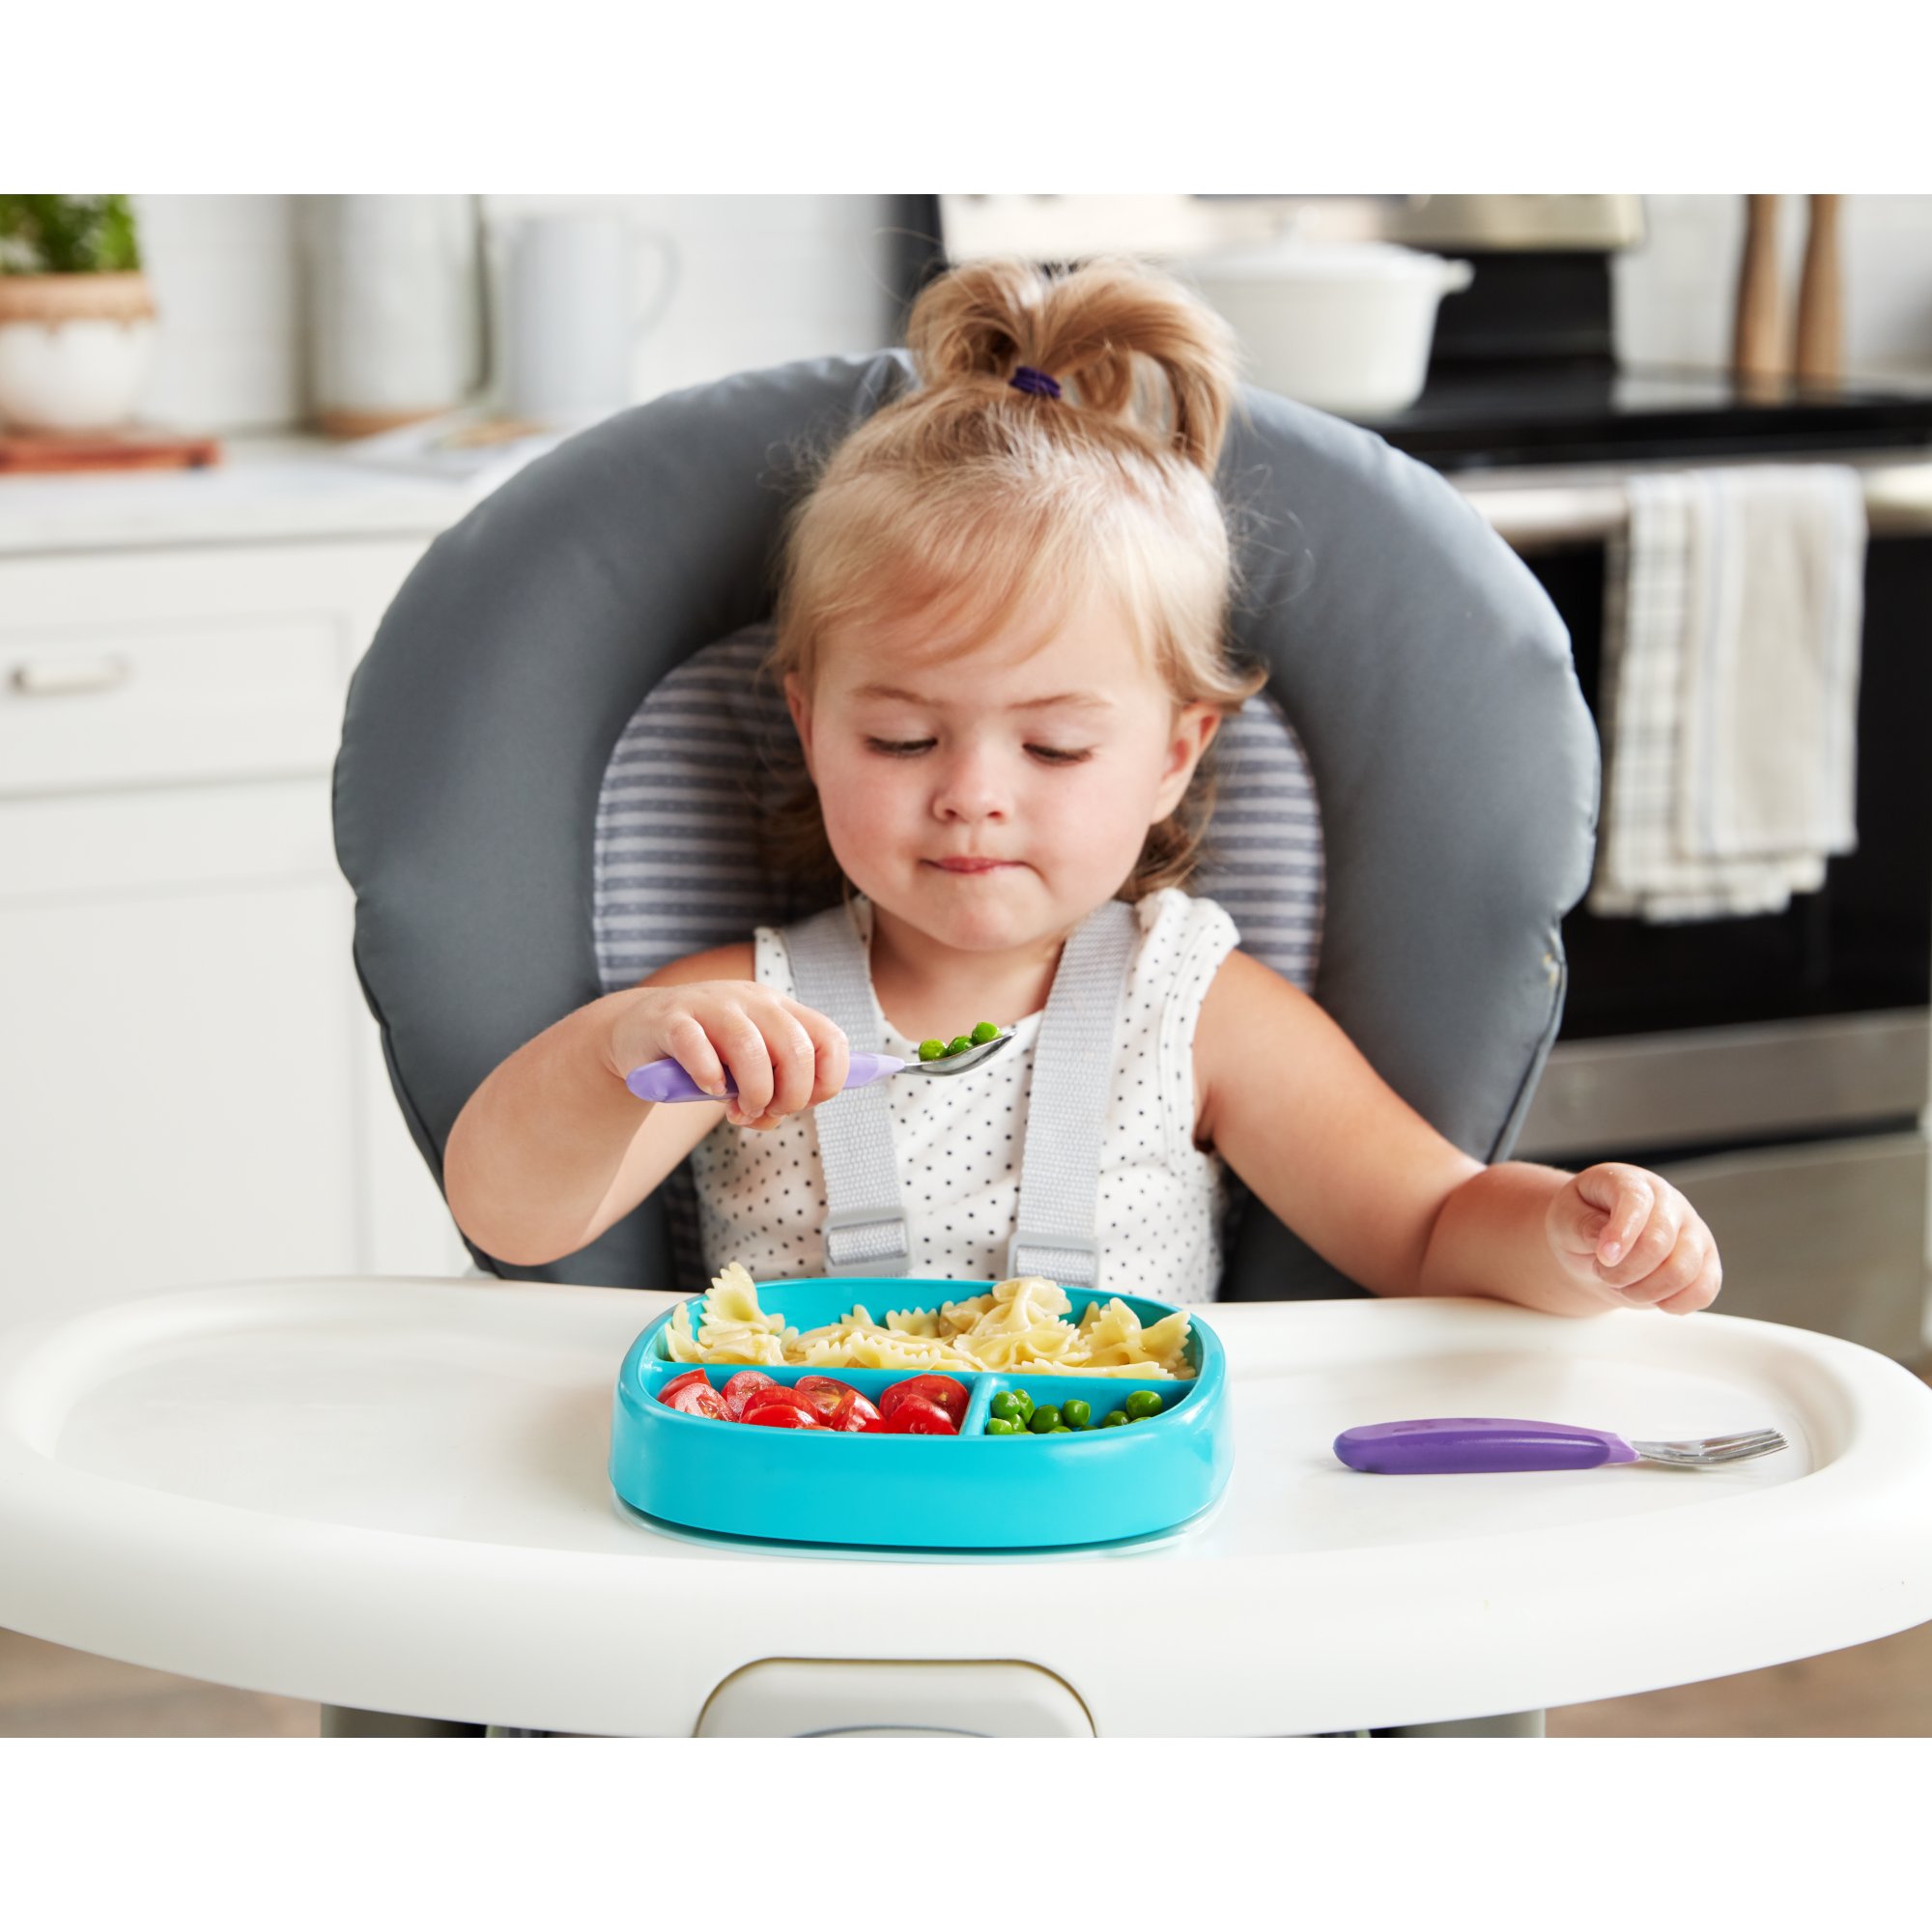 https://s7d9.scene7.com/is/image/NewellRubbermaid/NUK_Kiddy_Cutlery_Fork_Toddler_In_Use_%20Lifestyle_0440?wid=2000&hei=2000